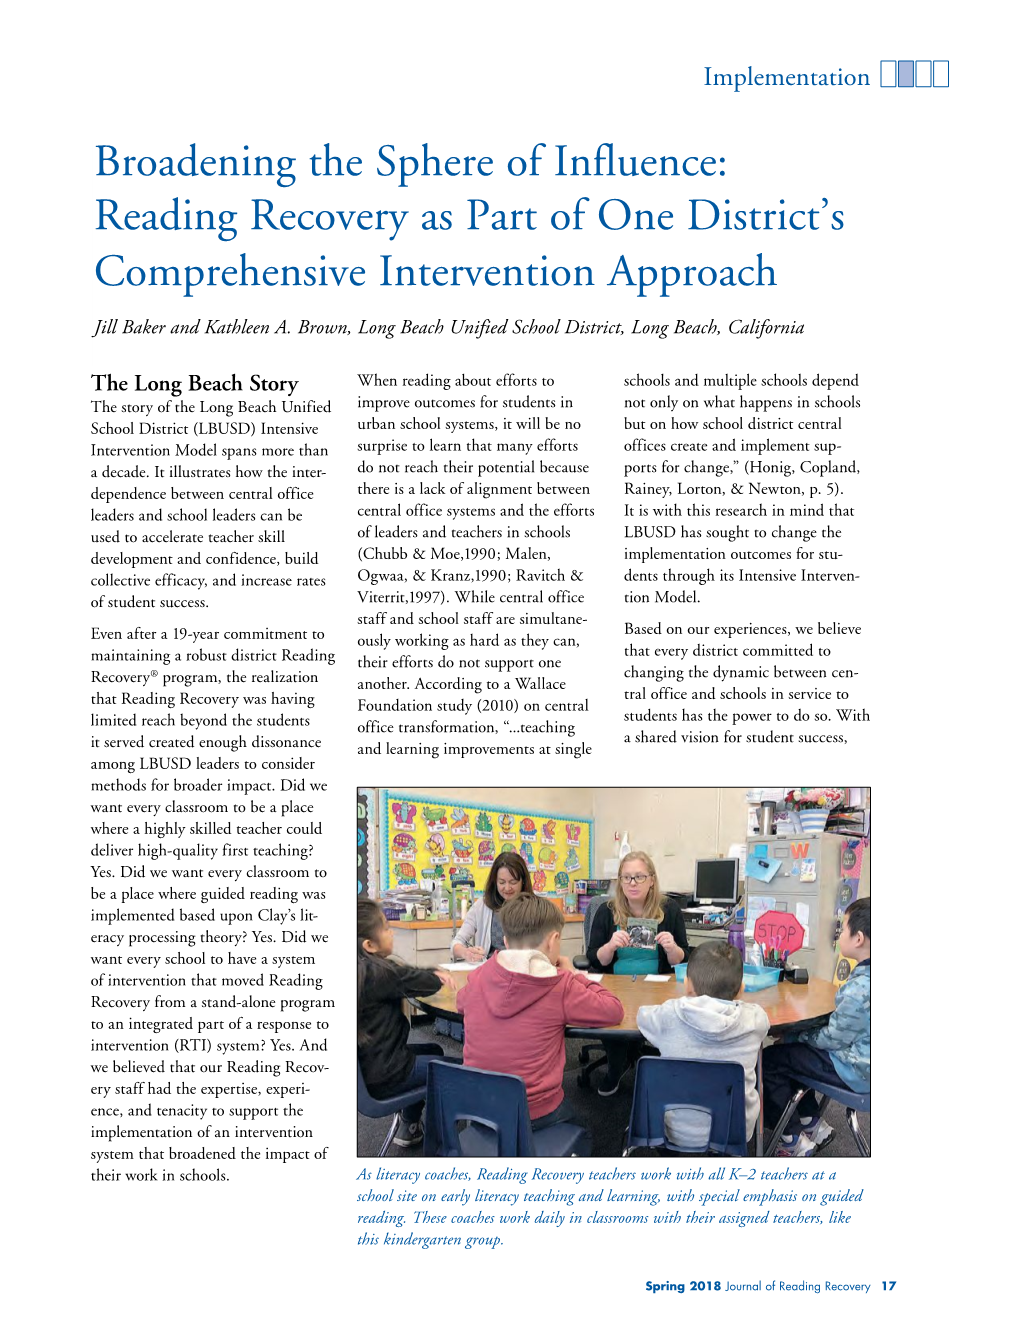 Broadening the Sphere of Influence: Reading Recovery As Part of One District’S Comprehensive Intervention Approach